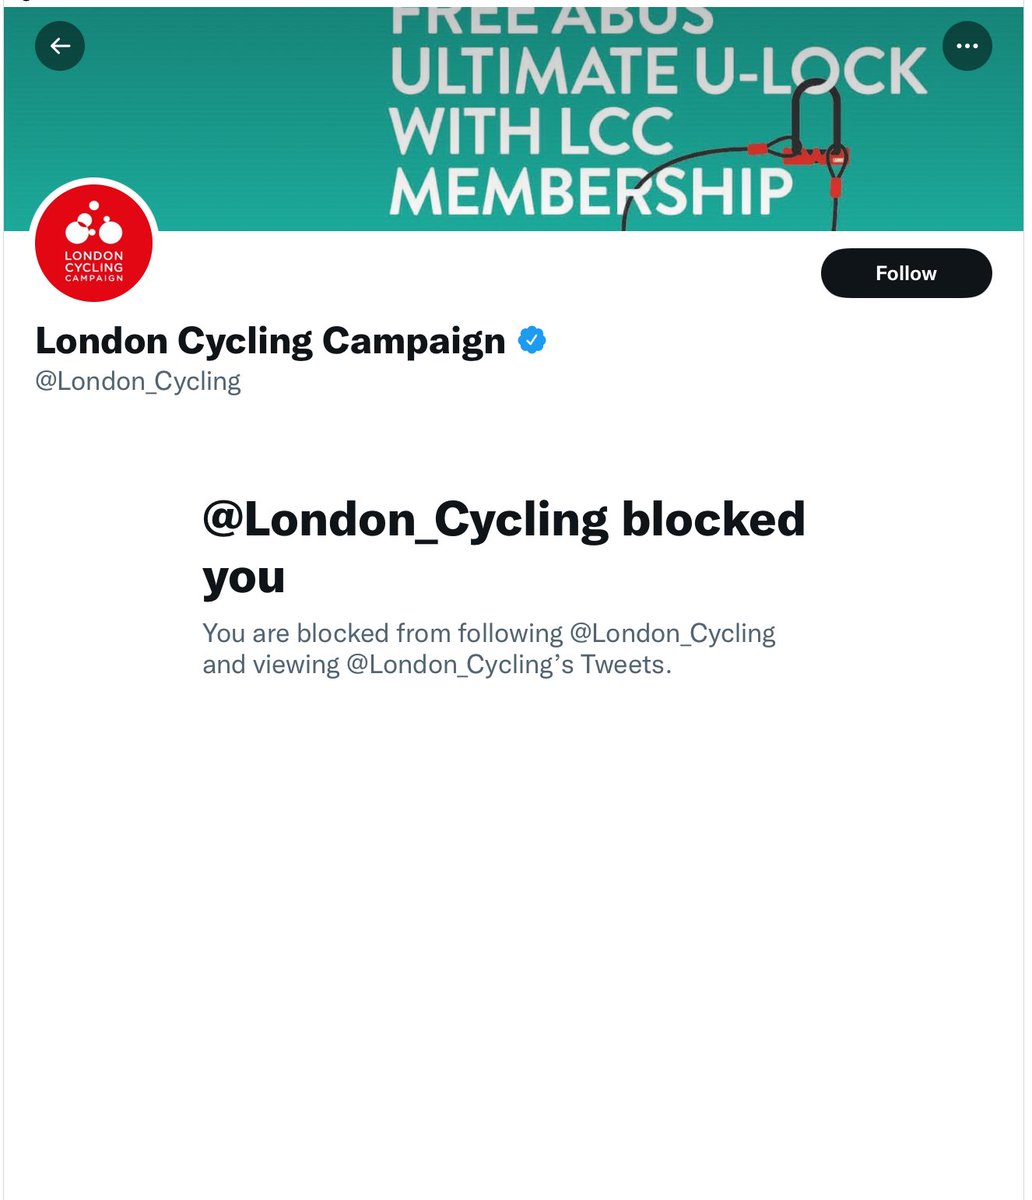 Just realised I’ve been blocked by the LCC! Guess they didn’t like me mentioning my partner’s resignation from that group. I found the lack of acknowledgment surprising considering that membership represented about 1/3 of all their African members. #environmentalinjustice